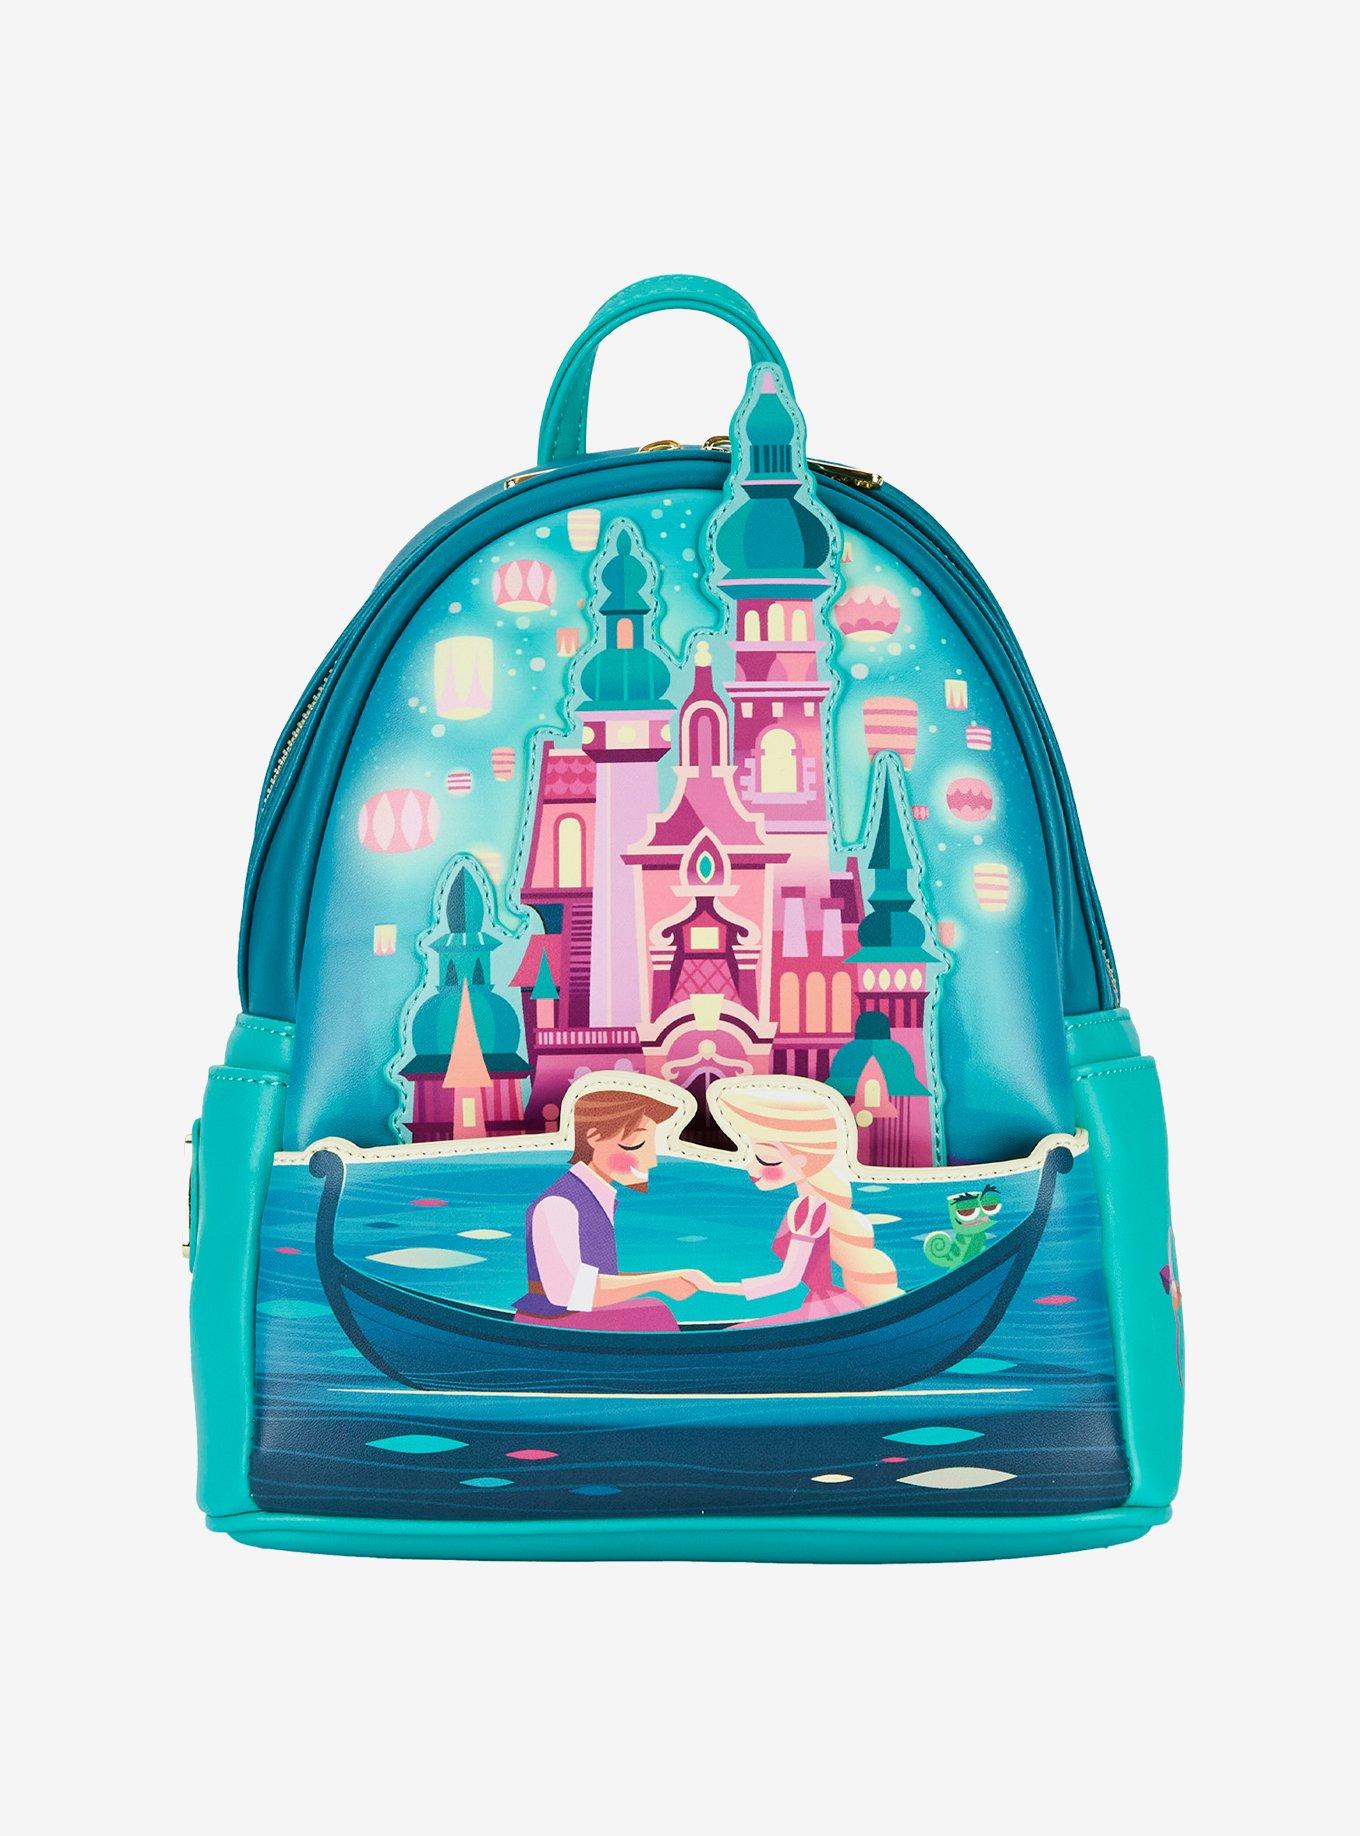 Coming Soon: Exclusive Loungefly Disney Tangled Rapunzel Stars Mini Backpack  💎 Only available at @hottopic